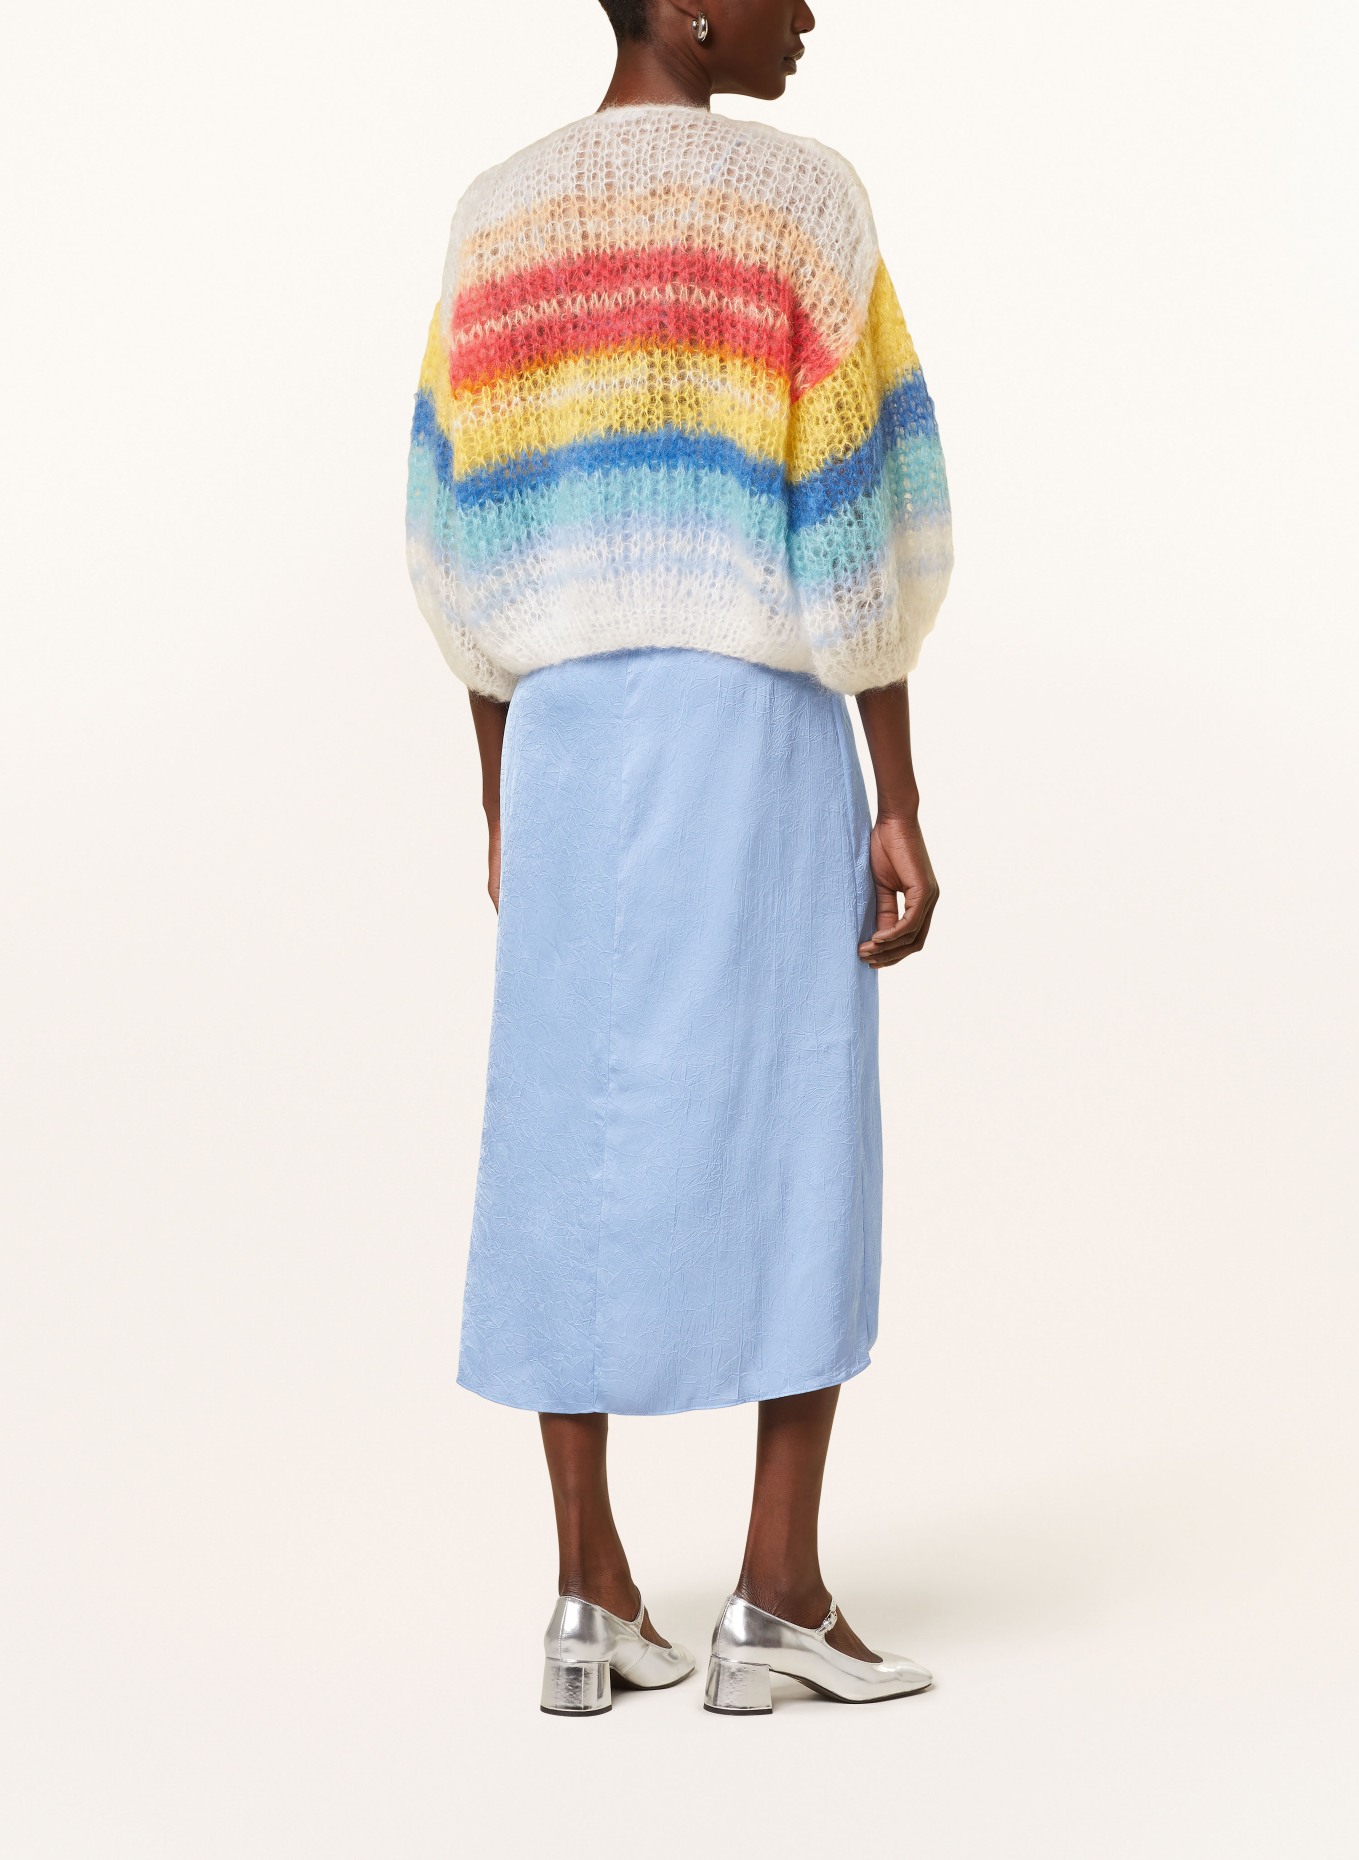 MAIAMI Cropped knit cardigan made of mohair, Color: WHITE/ RED/ YELLOW (Image 3)